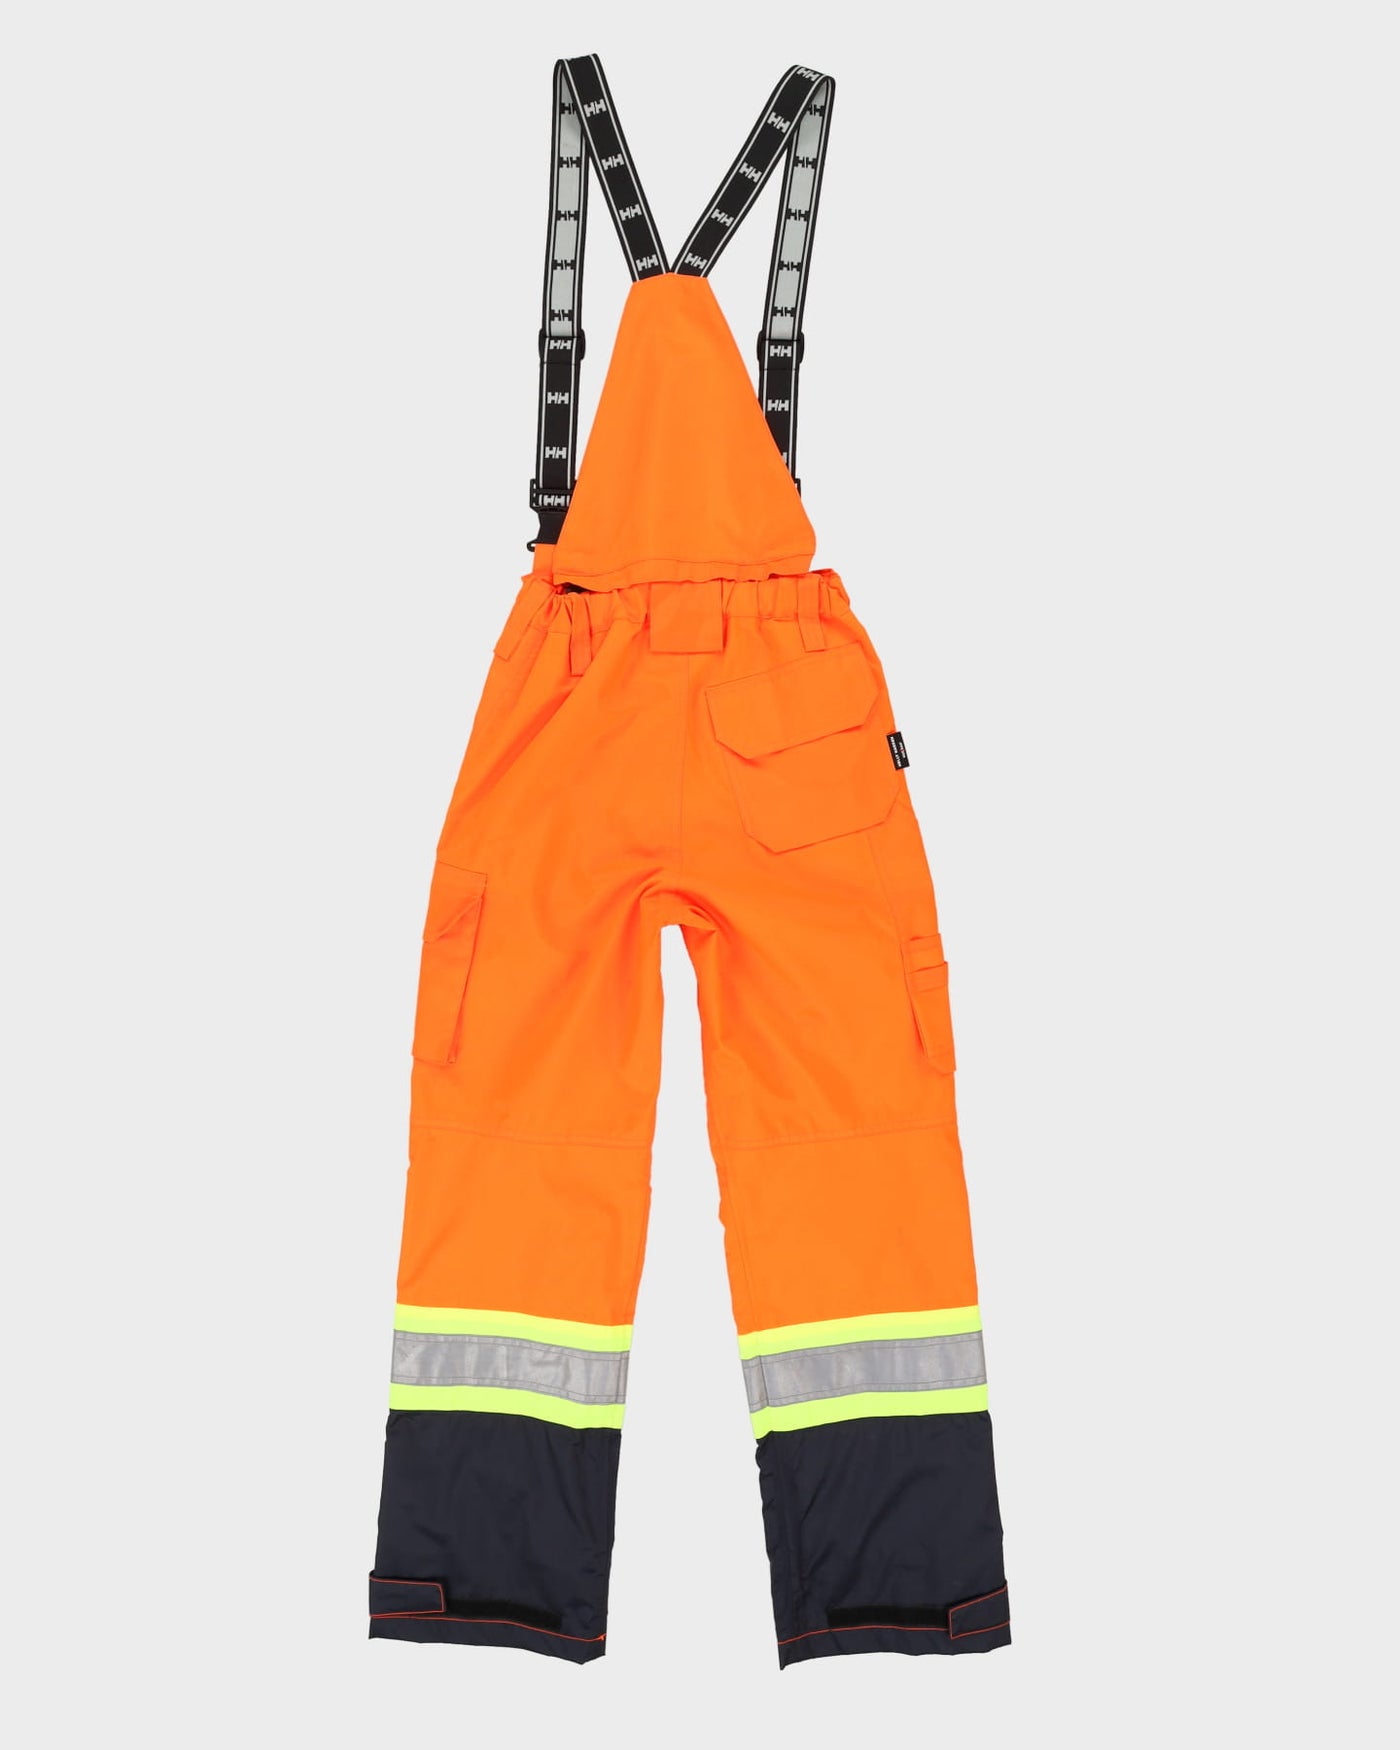 Deadstock With Tags Helly Hansen Orange Hi Vis Salopettes - XS